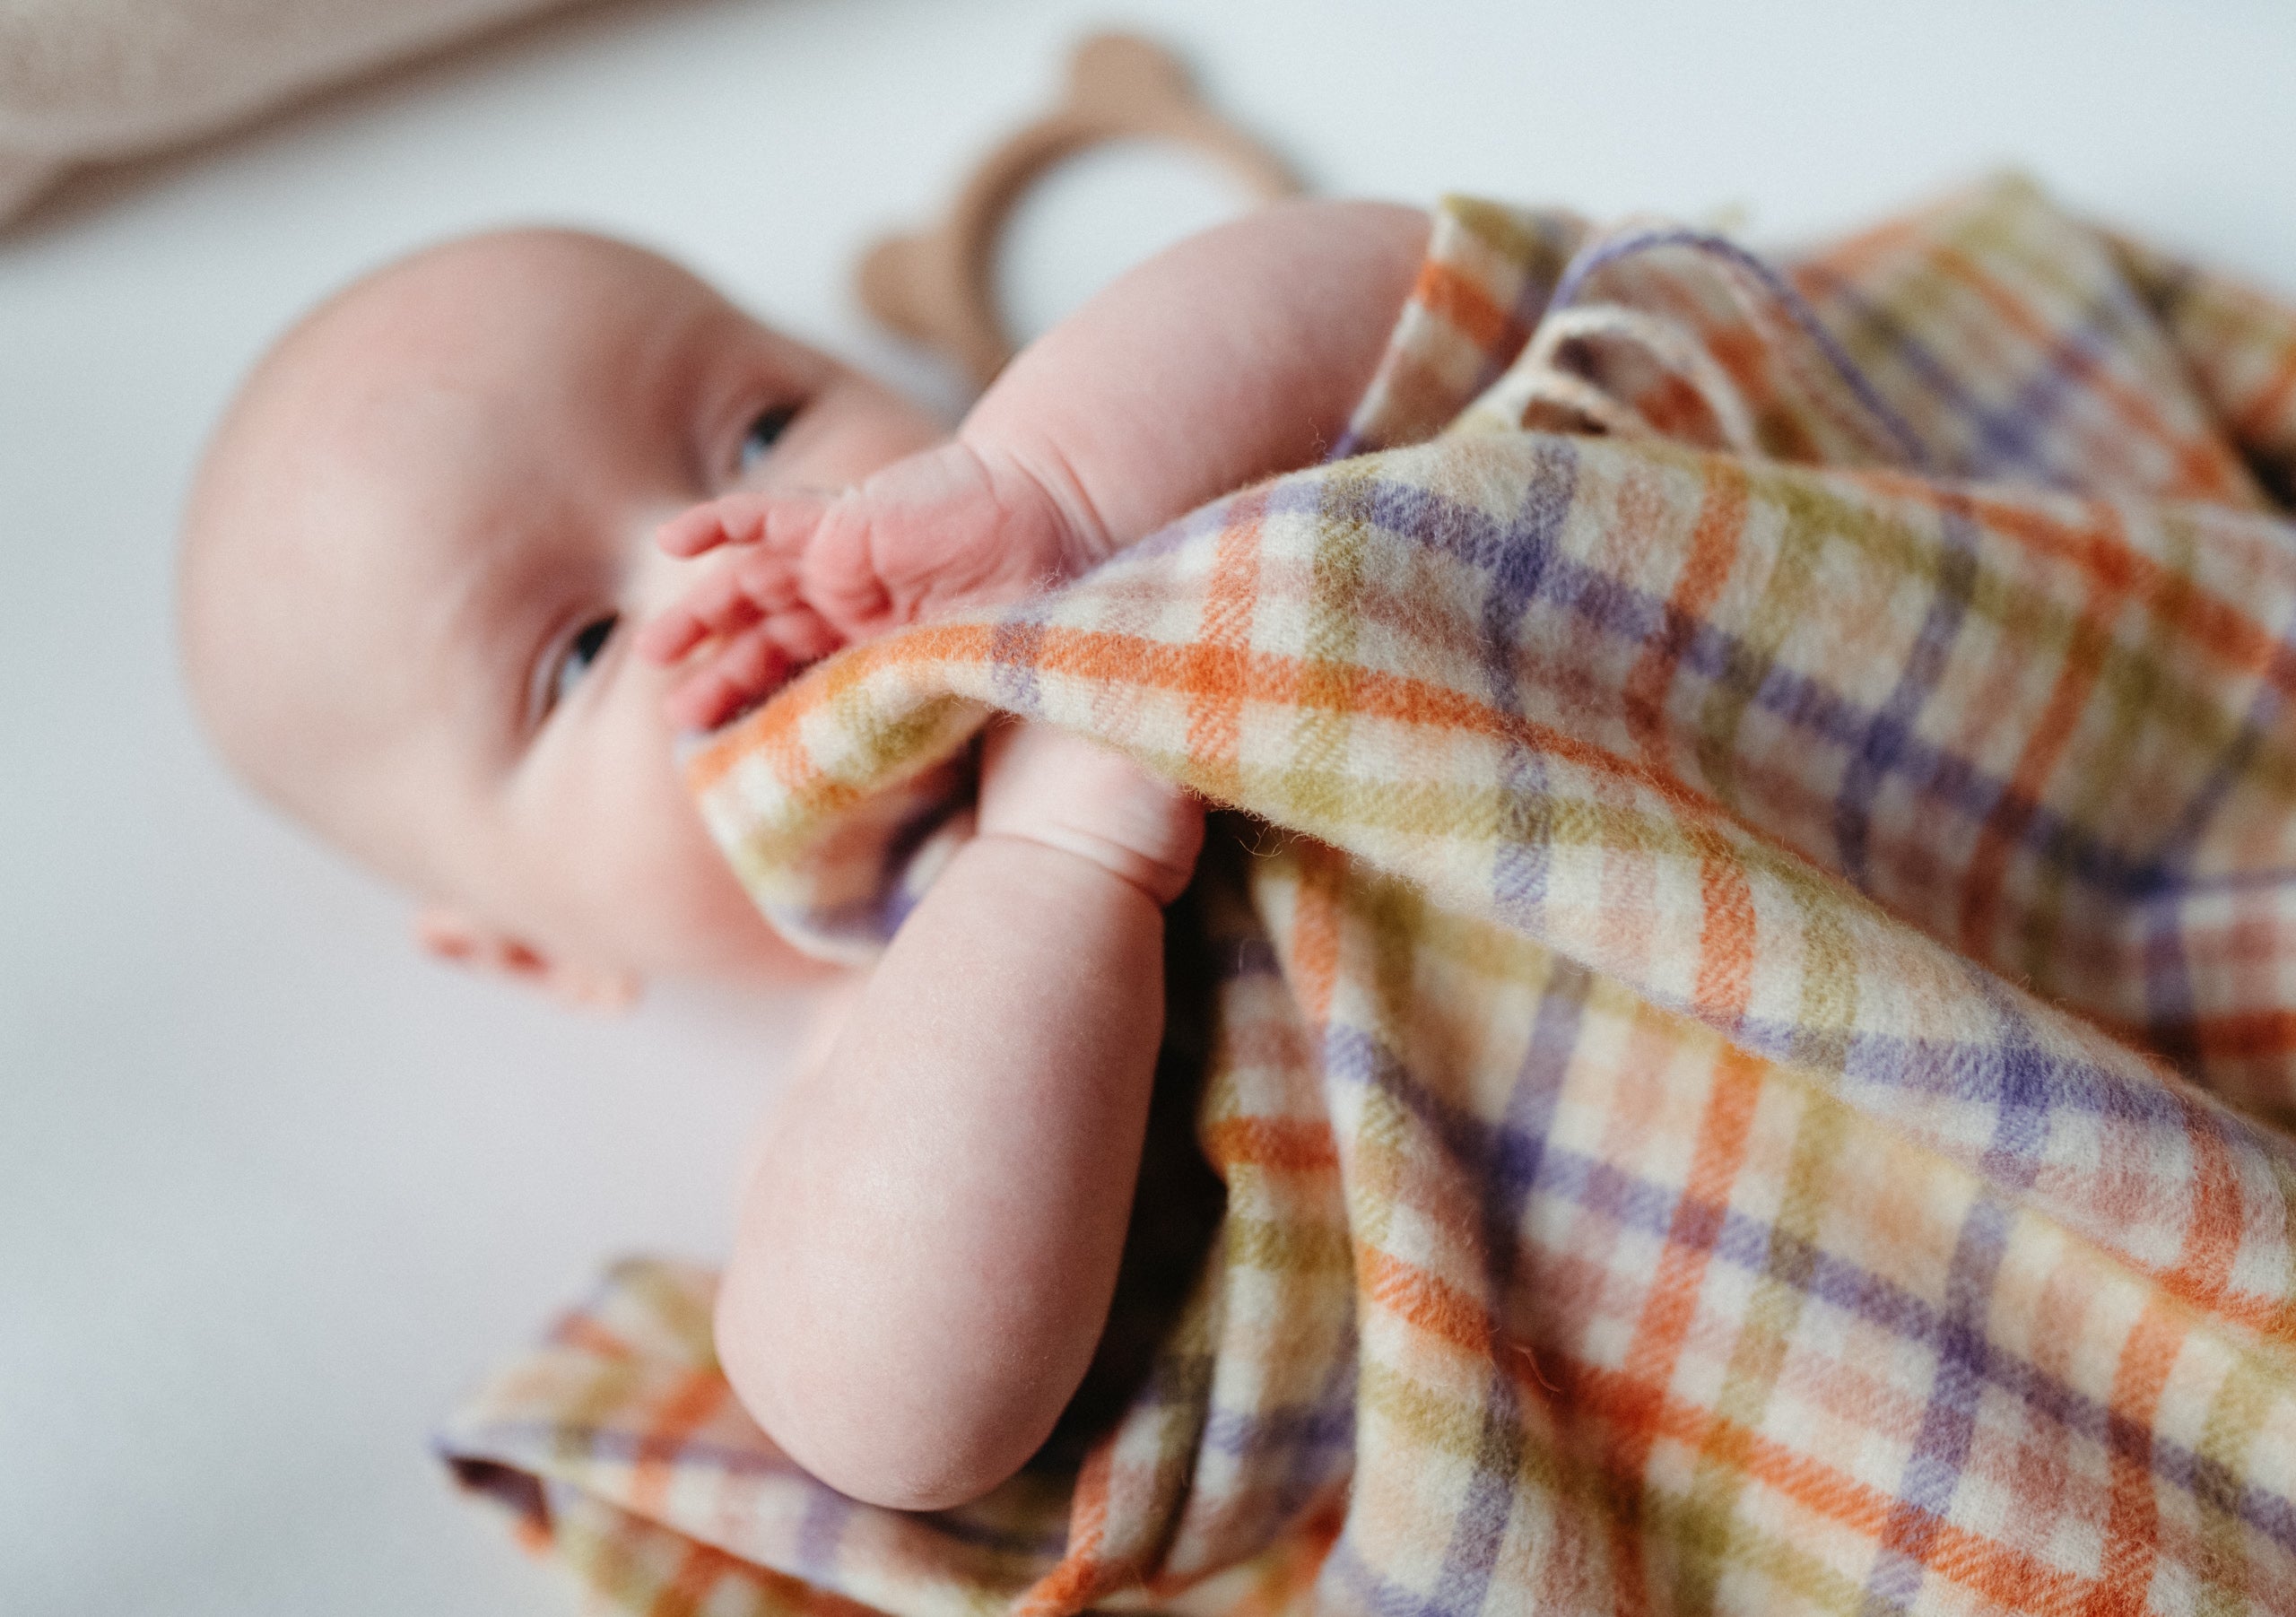 Close up of a baby lying in a crib with a colourful gingham baby blanket covering it